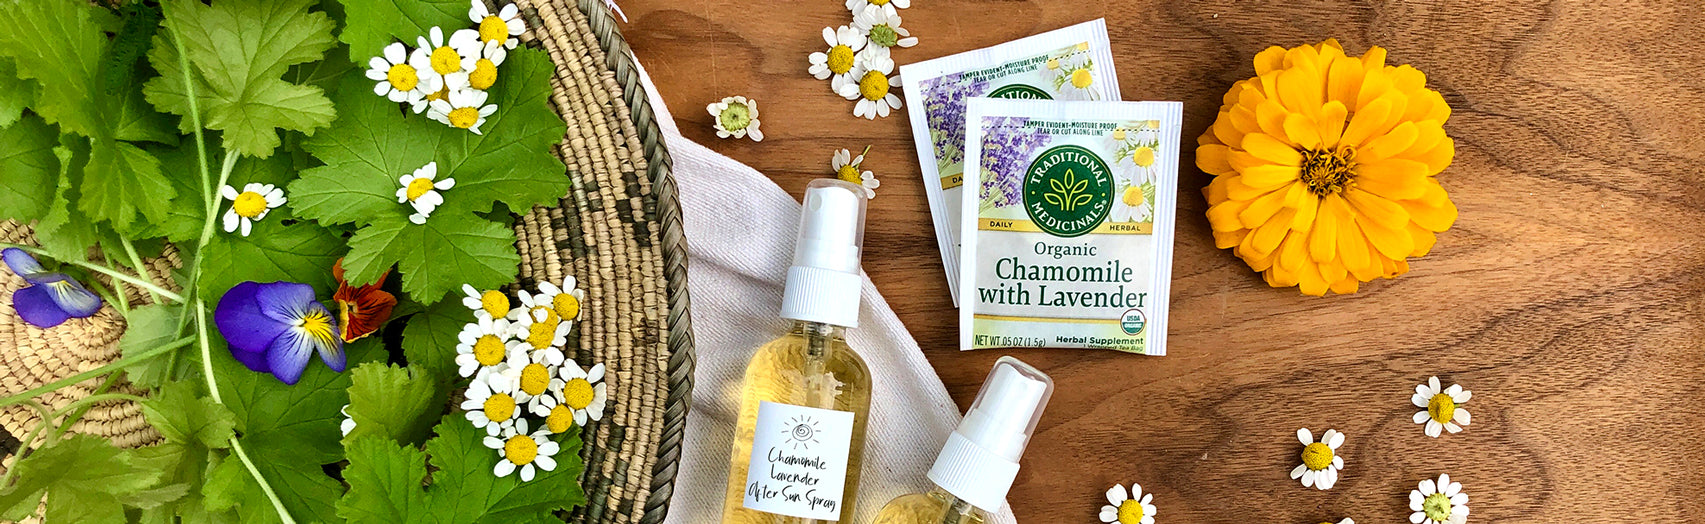 Chamomile with Lavender After Sun Spray in glass bottles surrounded by fresh herbs